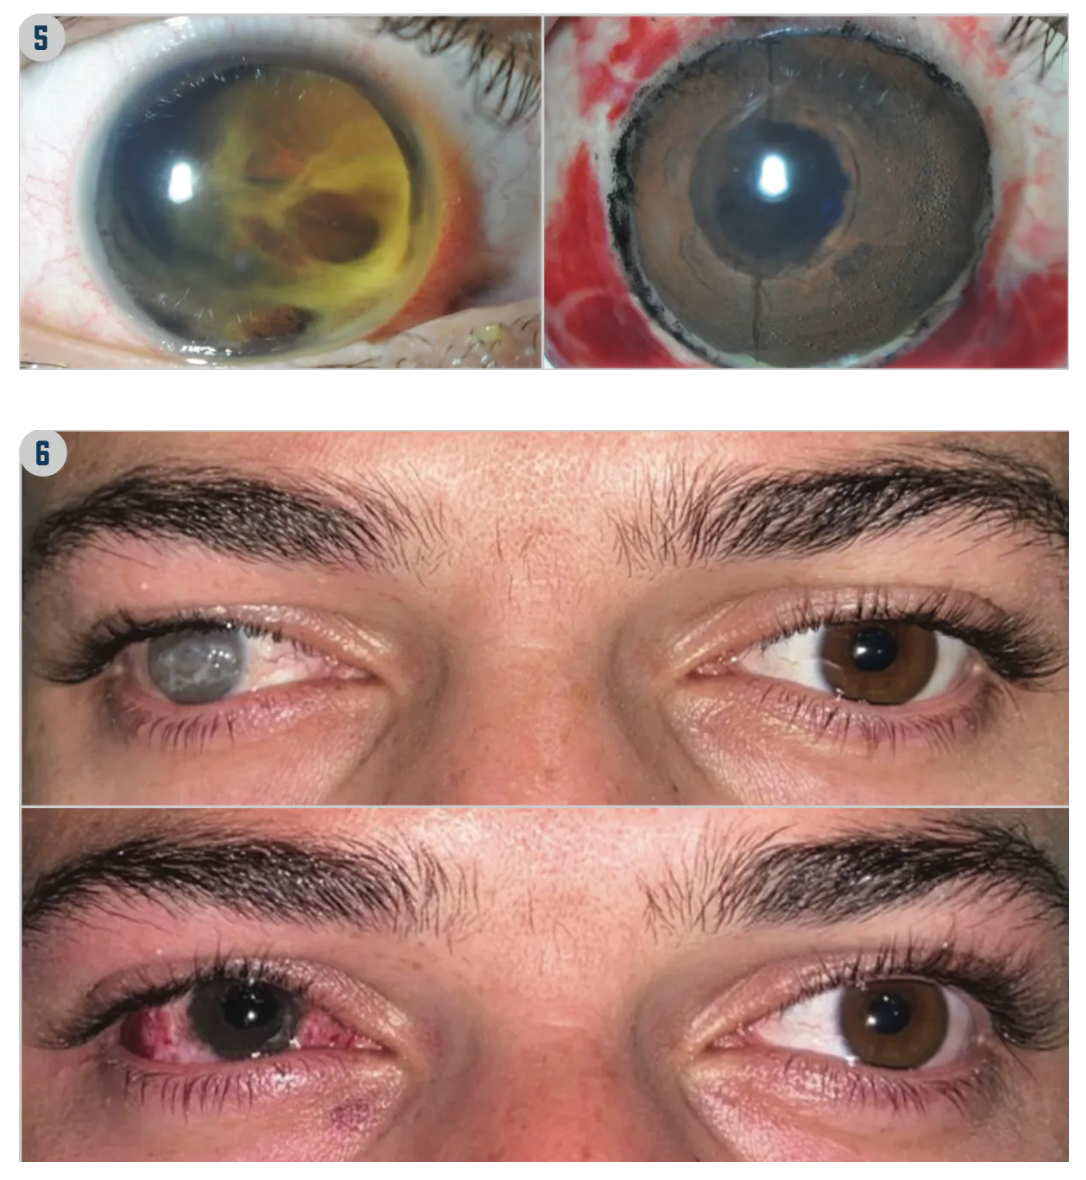 FIGURE 5. Manual Intrastromal Keratopigmentation and Pupil Simulation With Superficial Automated Keratopigmentation. Total corneal leucoma (left) and result after treatment with femtosecond- assisted intrastromal keratopigmentation and superficial automated keratopigmentation for the pupil (right).  FIGURE 6. Keratopigmentation With Strabismus Surgery. Preoperative appearance before keratopigmentation and squint surgery (top) and postoperative result (right). (Images courtesy of Jorge L. Alió, MD, PhD, FEBOphth)